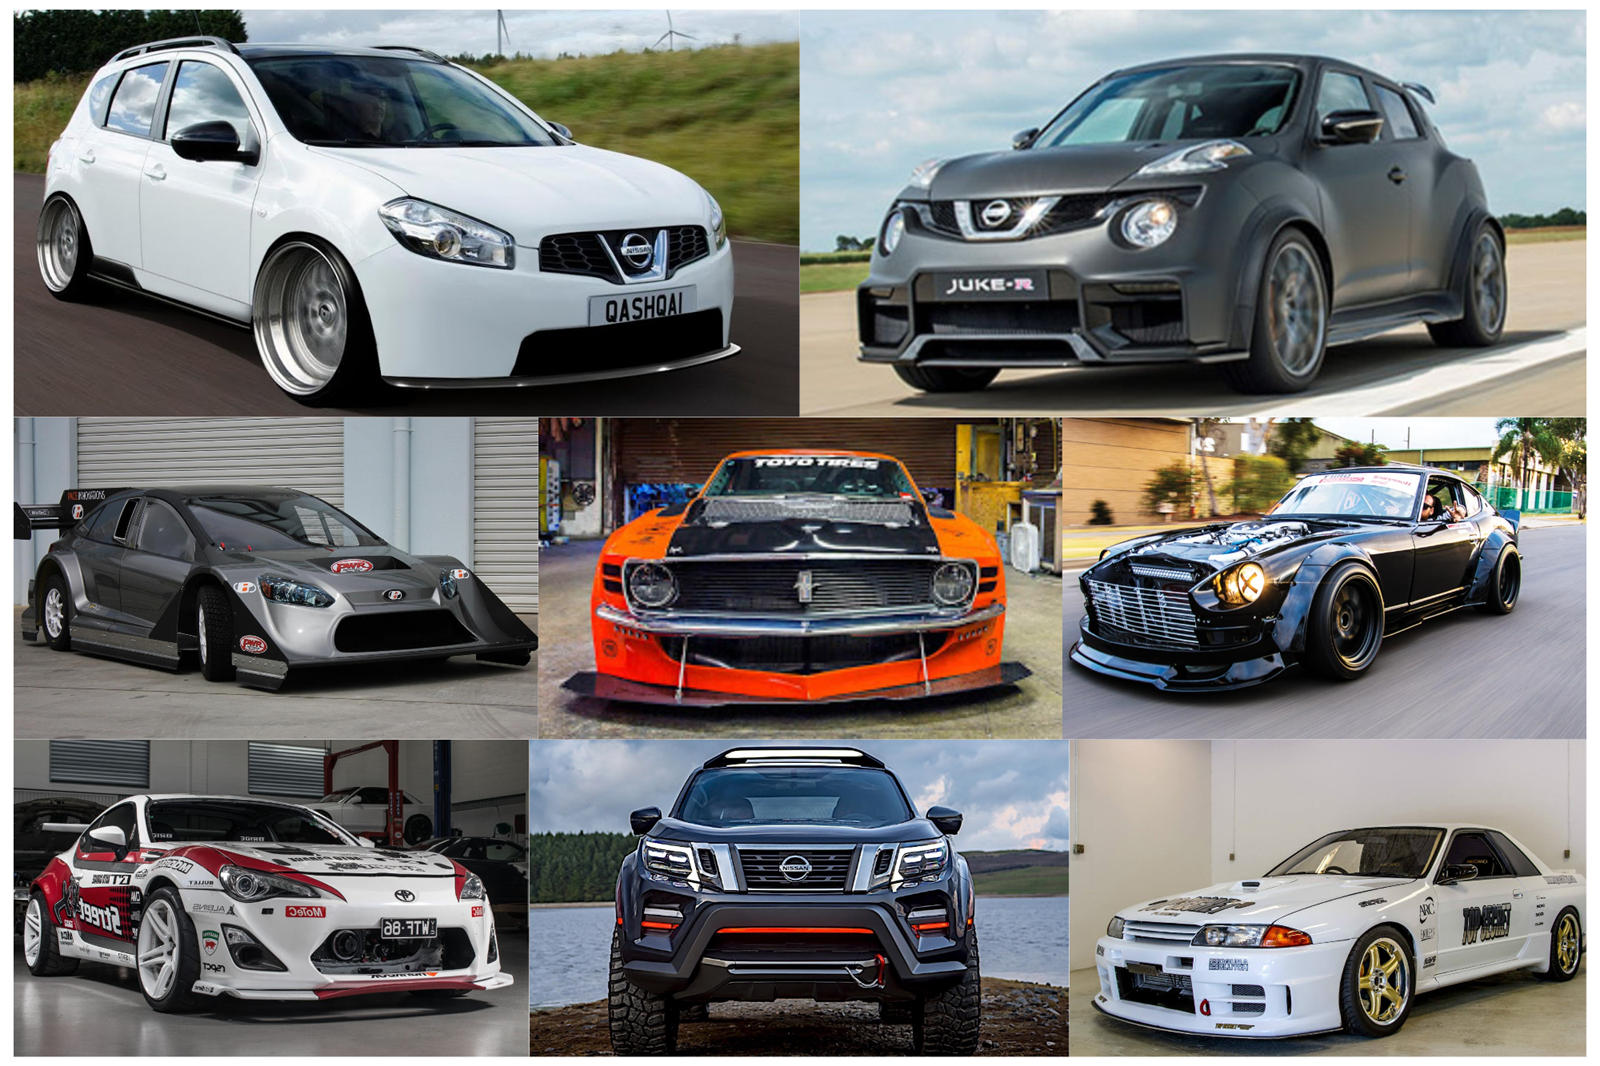 10 Nissans That Make Great Project Cars